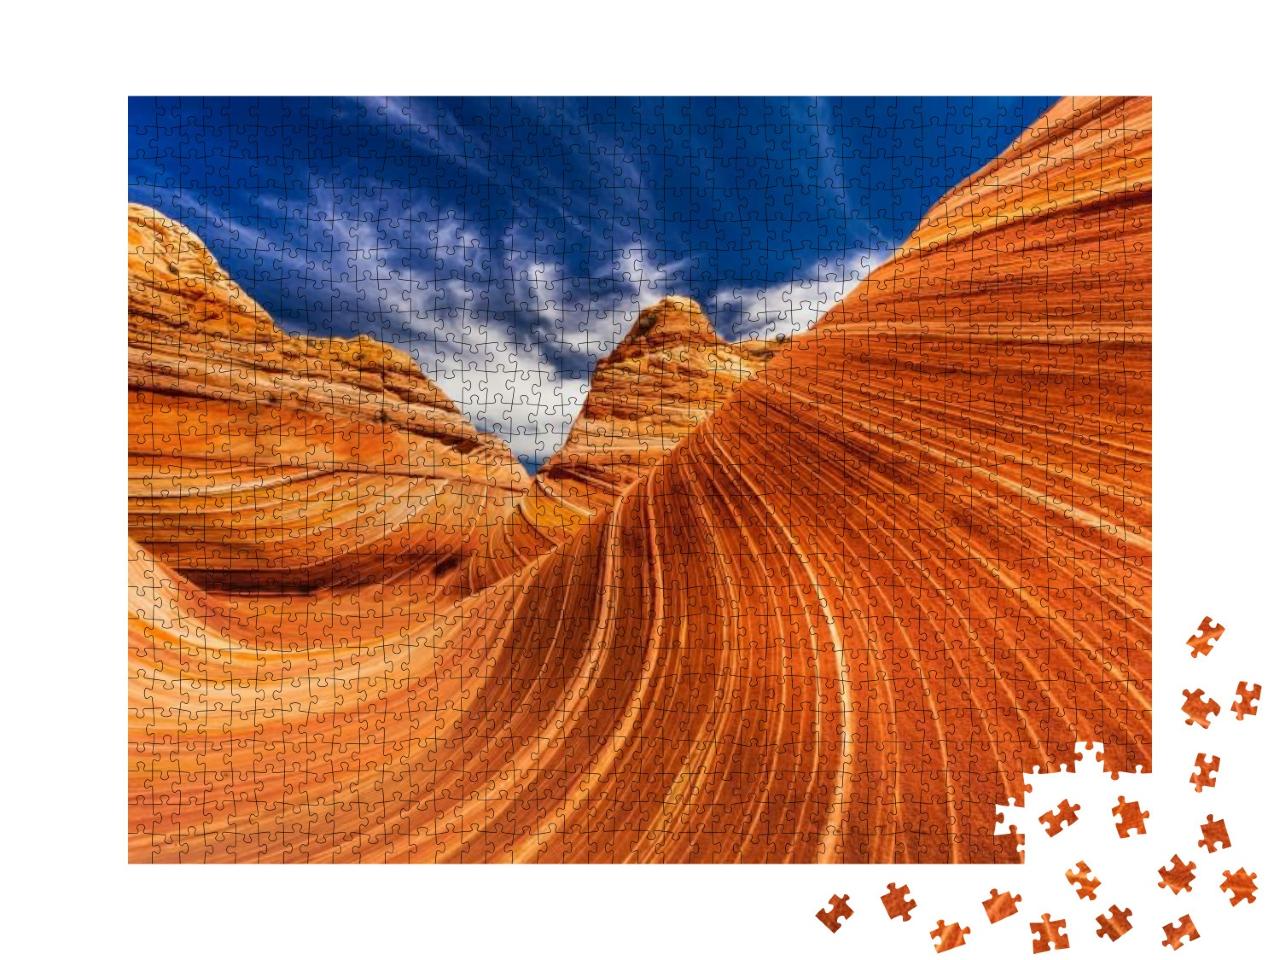 Petrified Sand Dunes Known as the Wave Near the Utah/Ariz... Jigsaw Puzzle with 1000 pieces